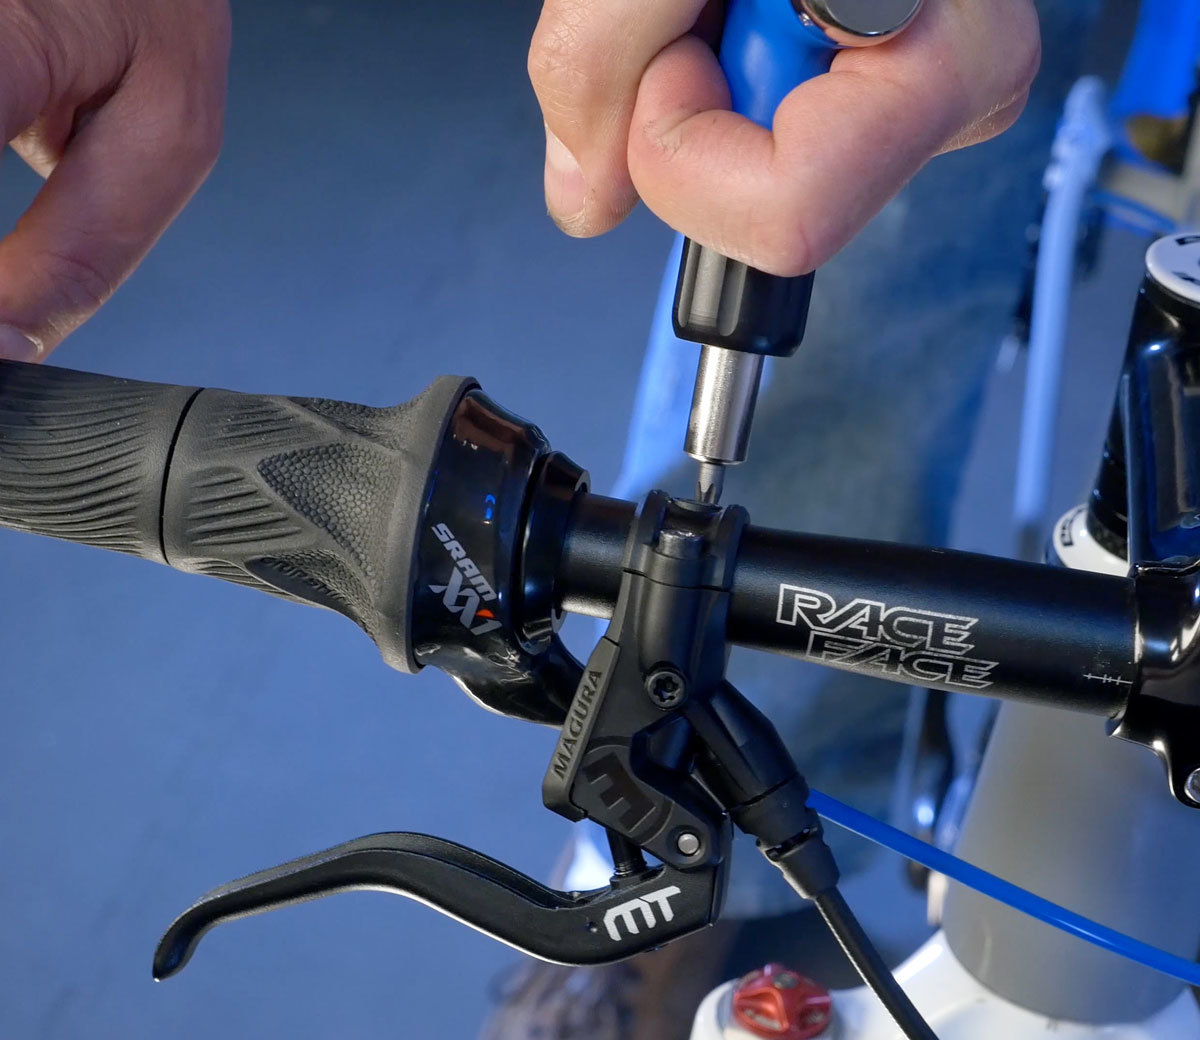 Properly secure brake lever mounting bolts